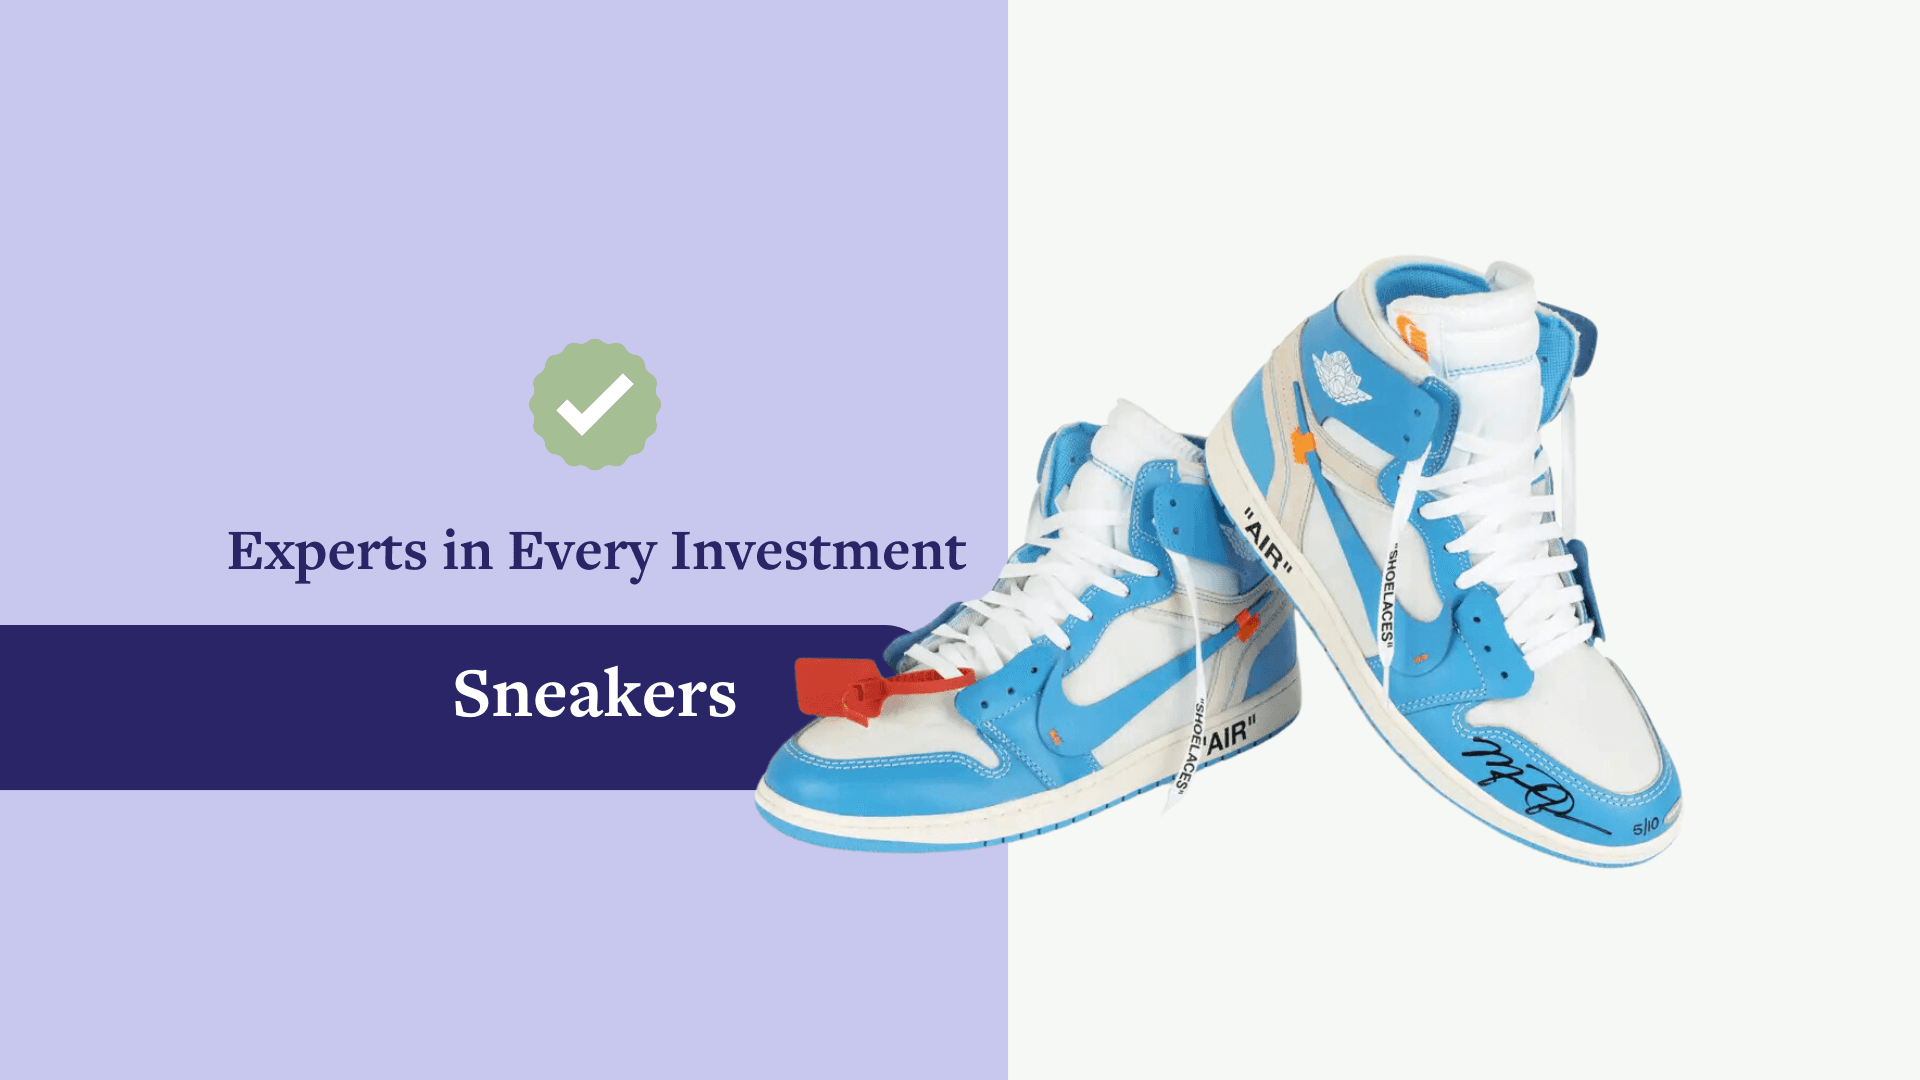 ✅ Experts in Every Investment: A Sneaker Enthusiast 